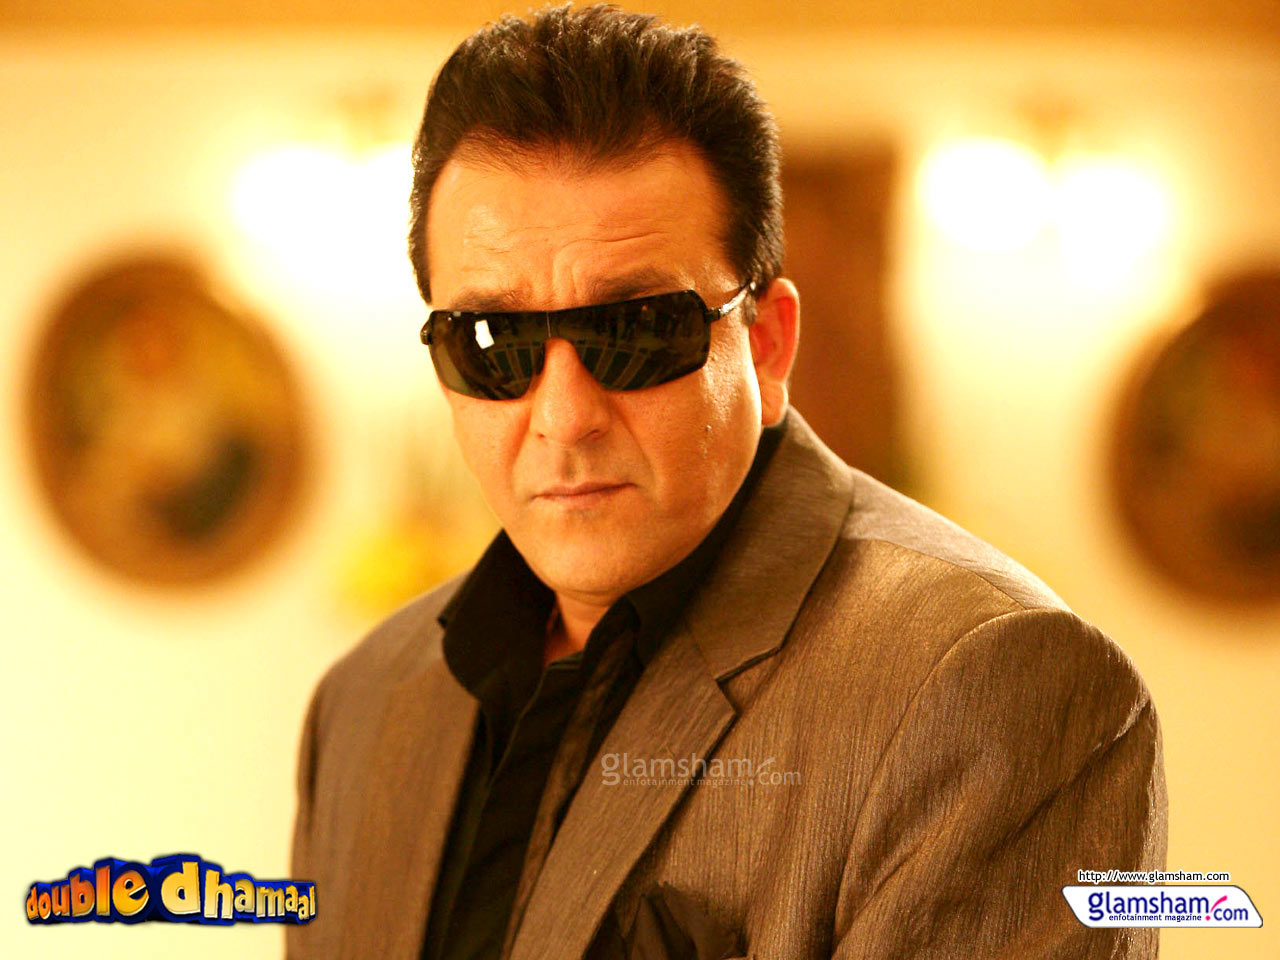 BOLLYWOOD STAR NEWS: I know more on the sanjay dutt